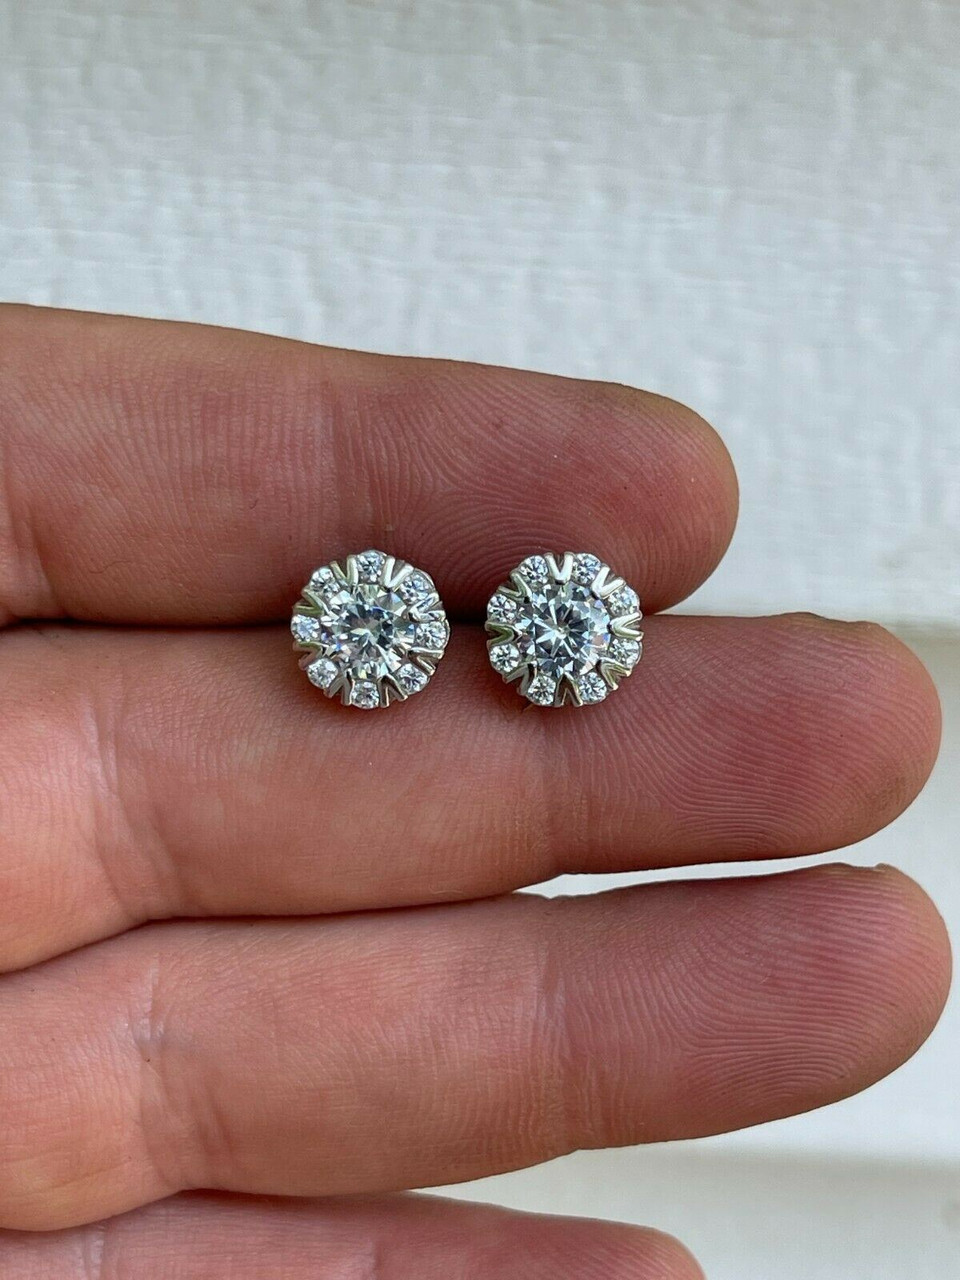 Real Solid 925 Silver Iced CZ Out Hip Hop Earrings Studs Large 10mm Mens  Ladies